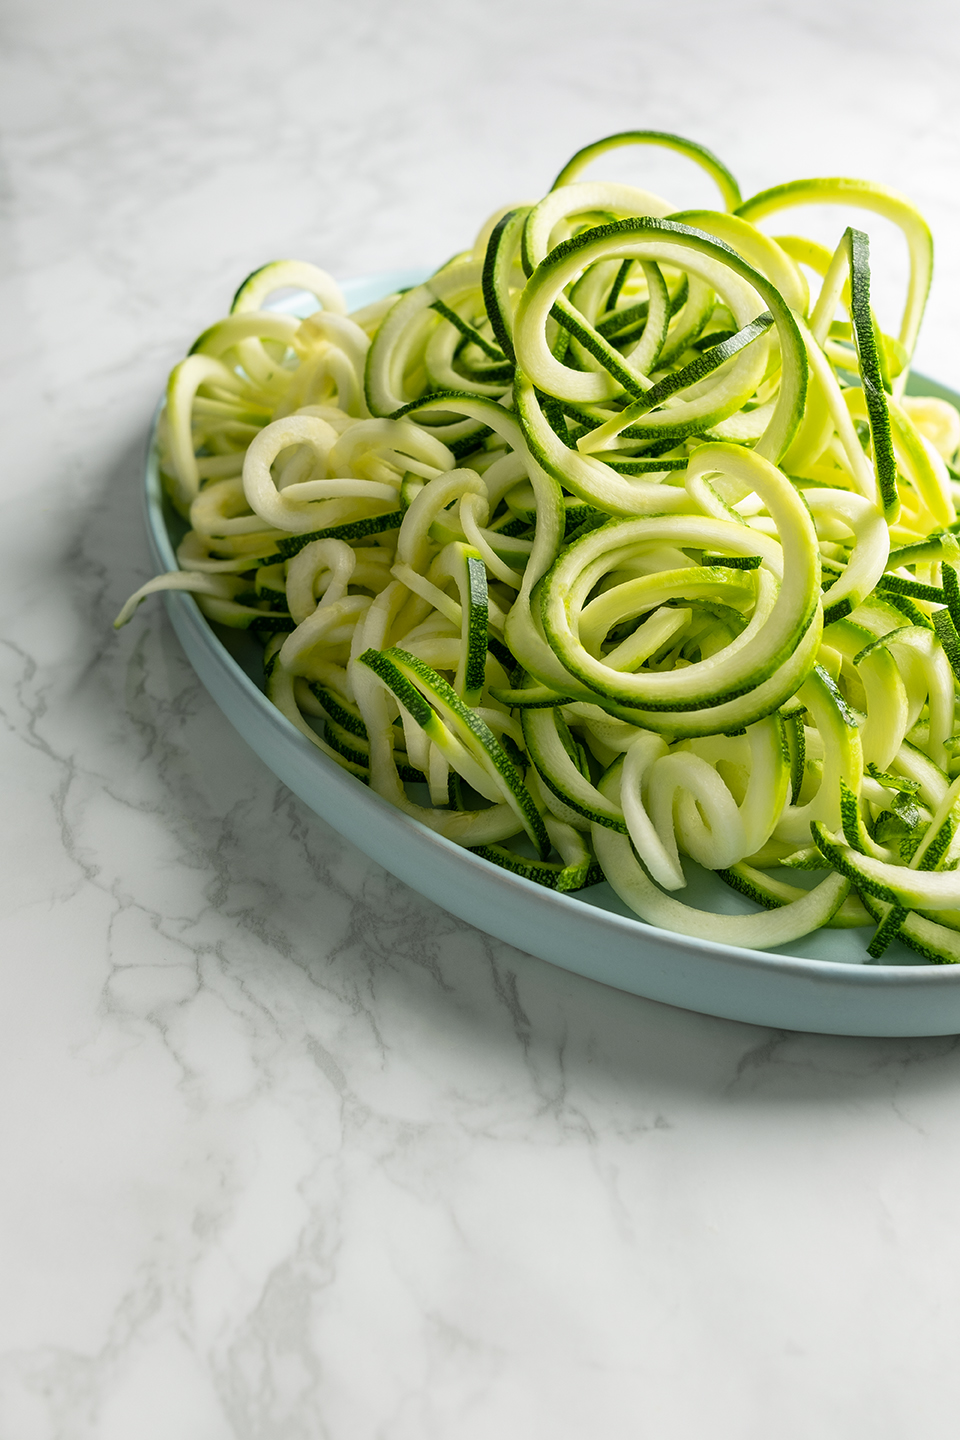  Zoodled zucchini in a pile on oval blue serving tray on a marble background.  